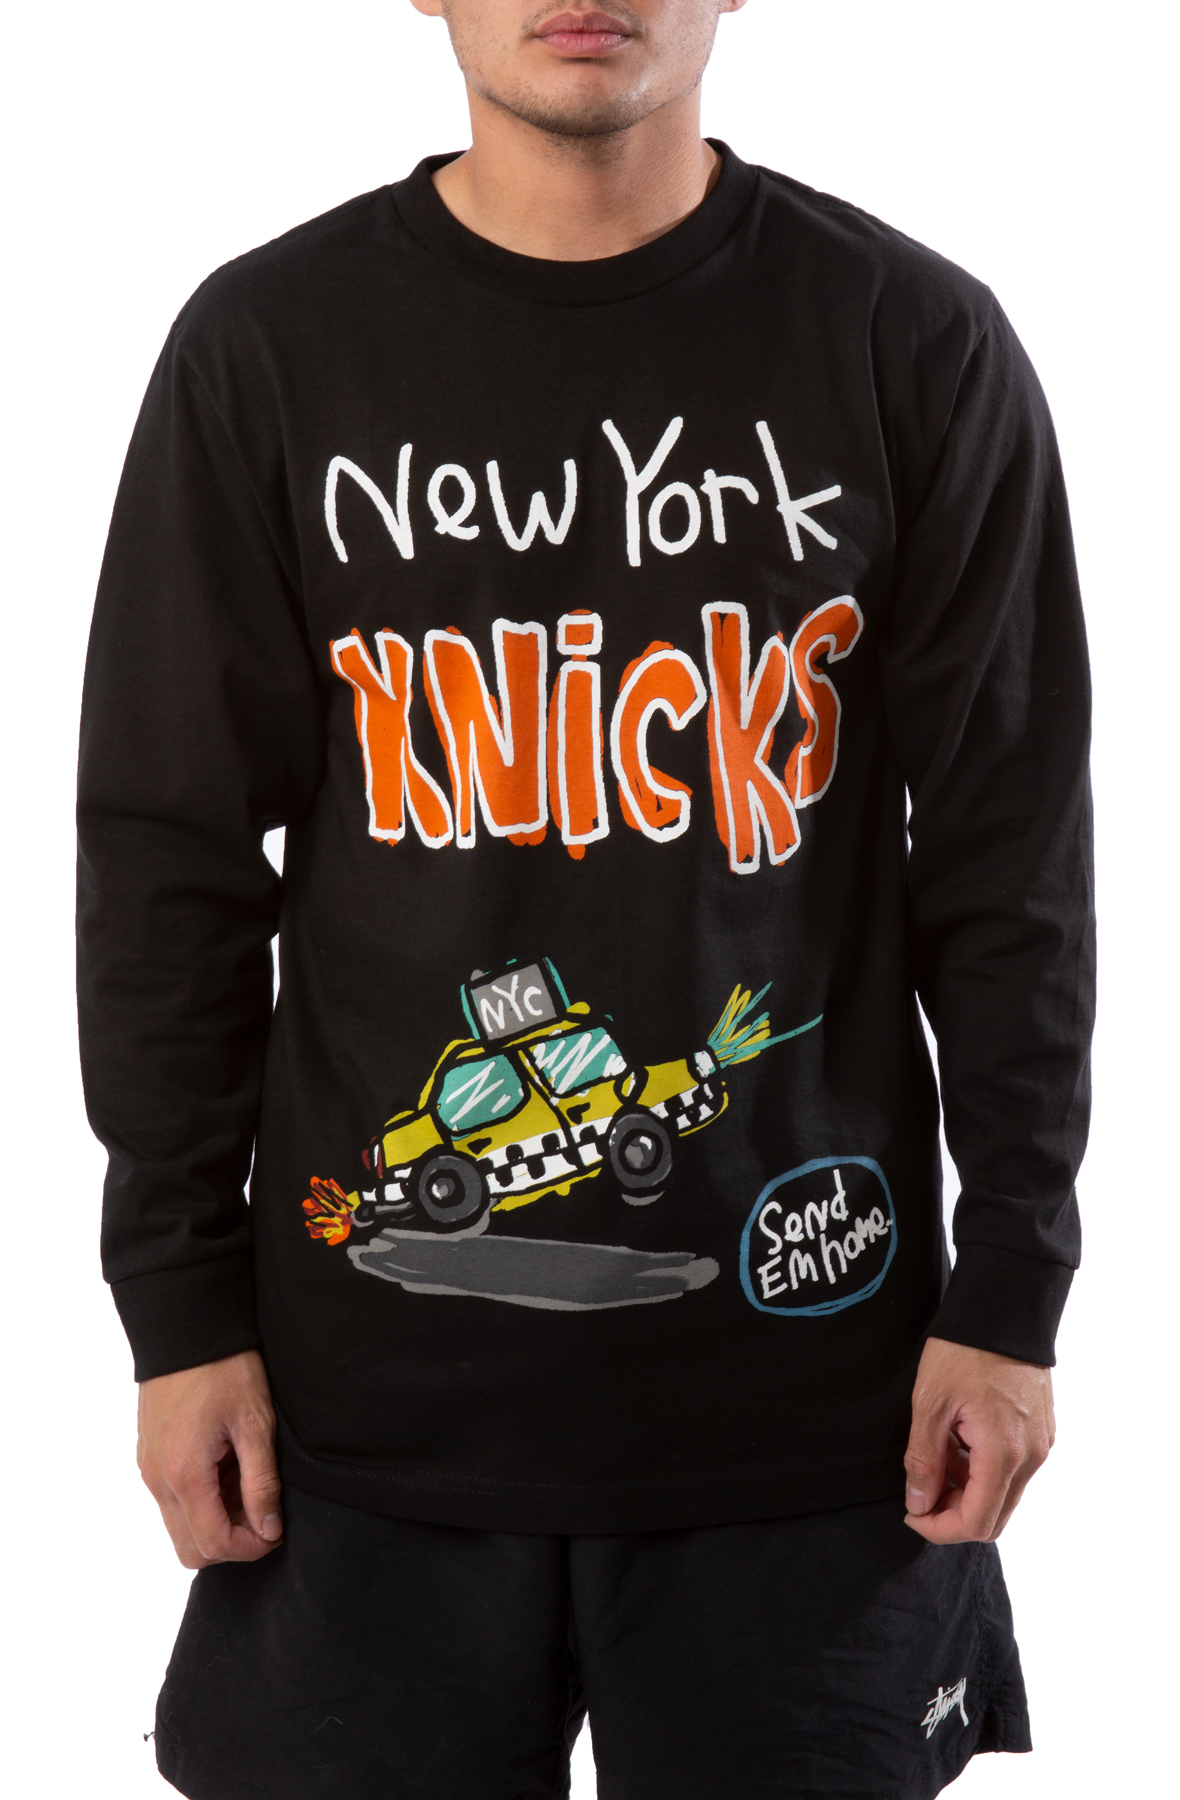 Vintage New York Knicks T-shirt – For All To Envy